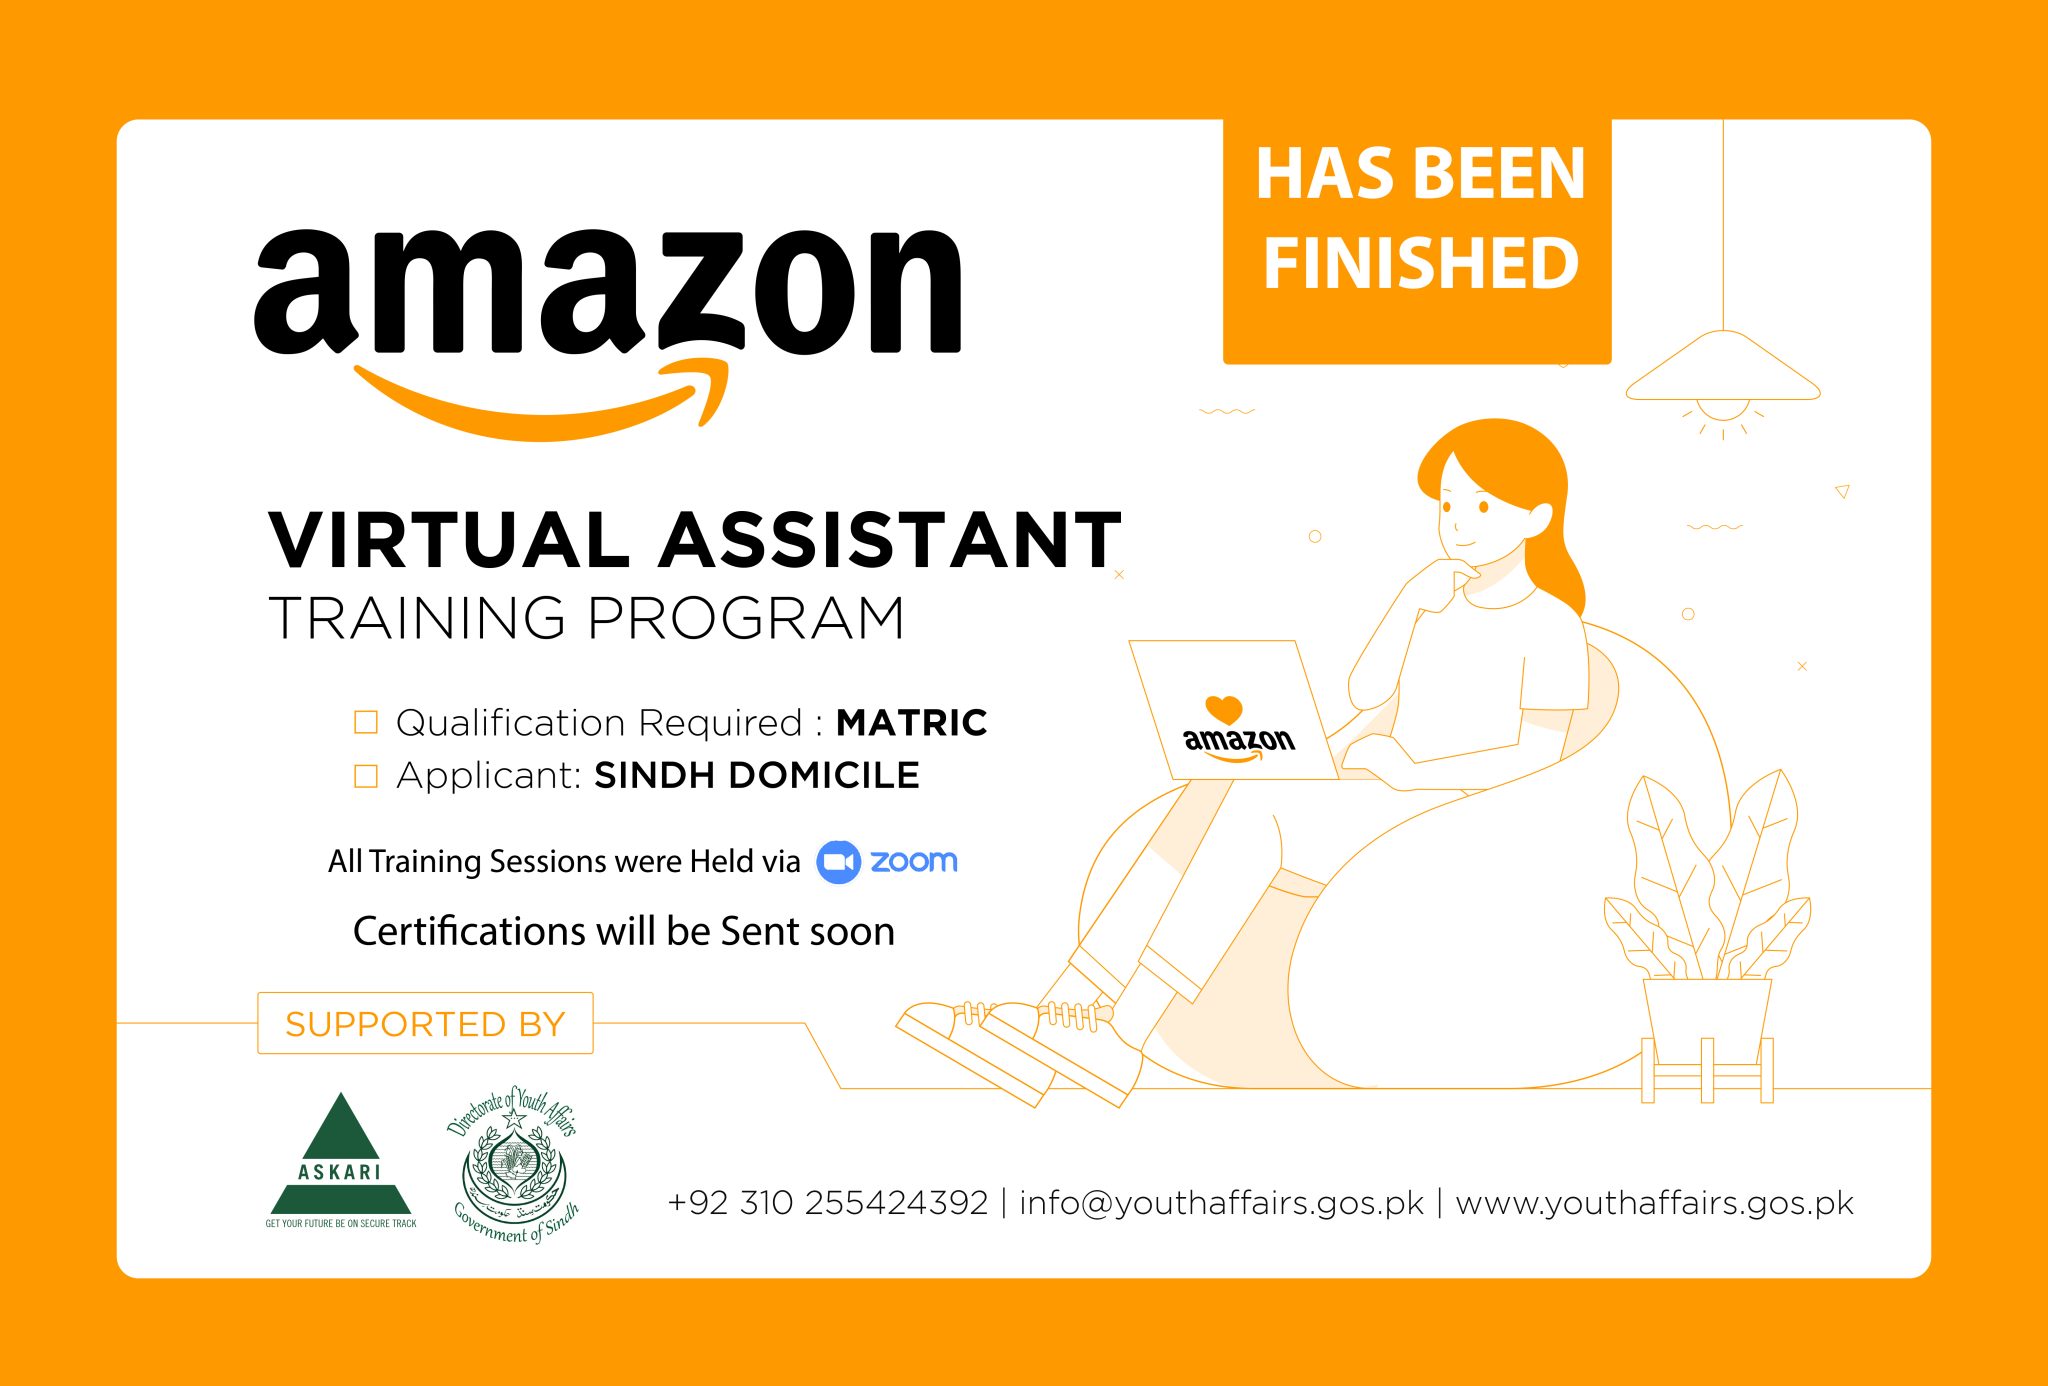 Amazon Virtual Assistant Training Program have been finished